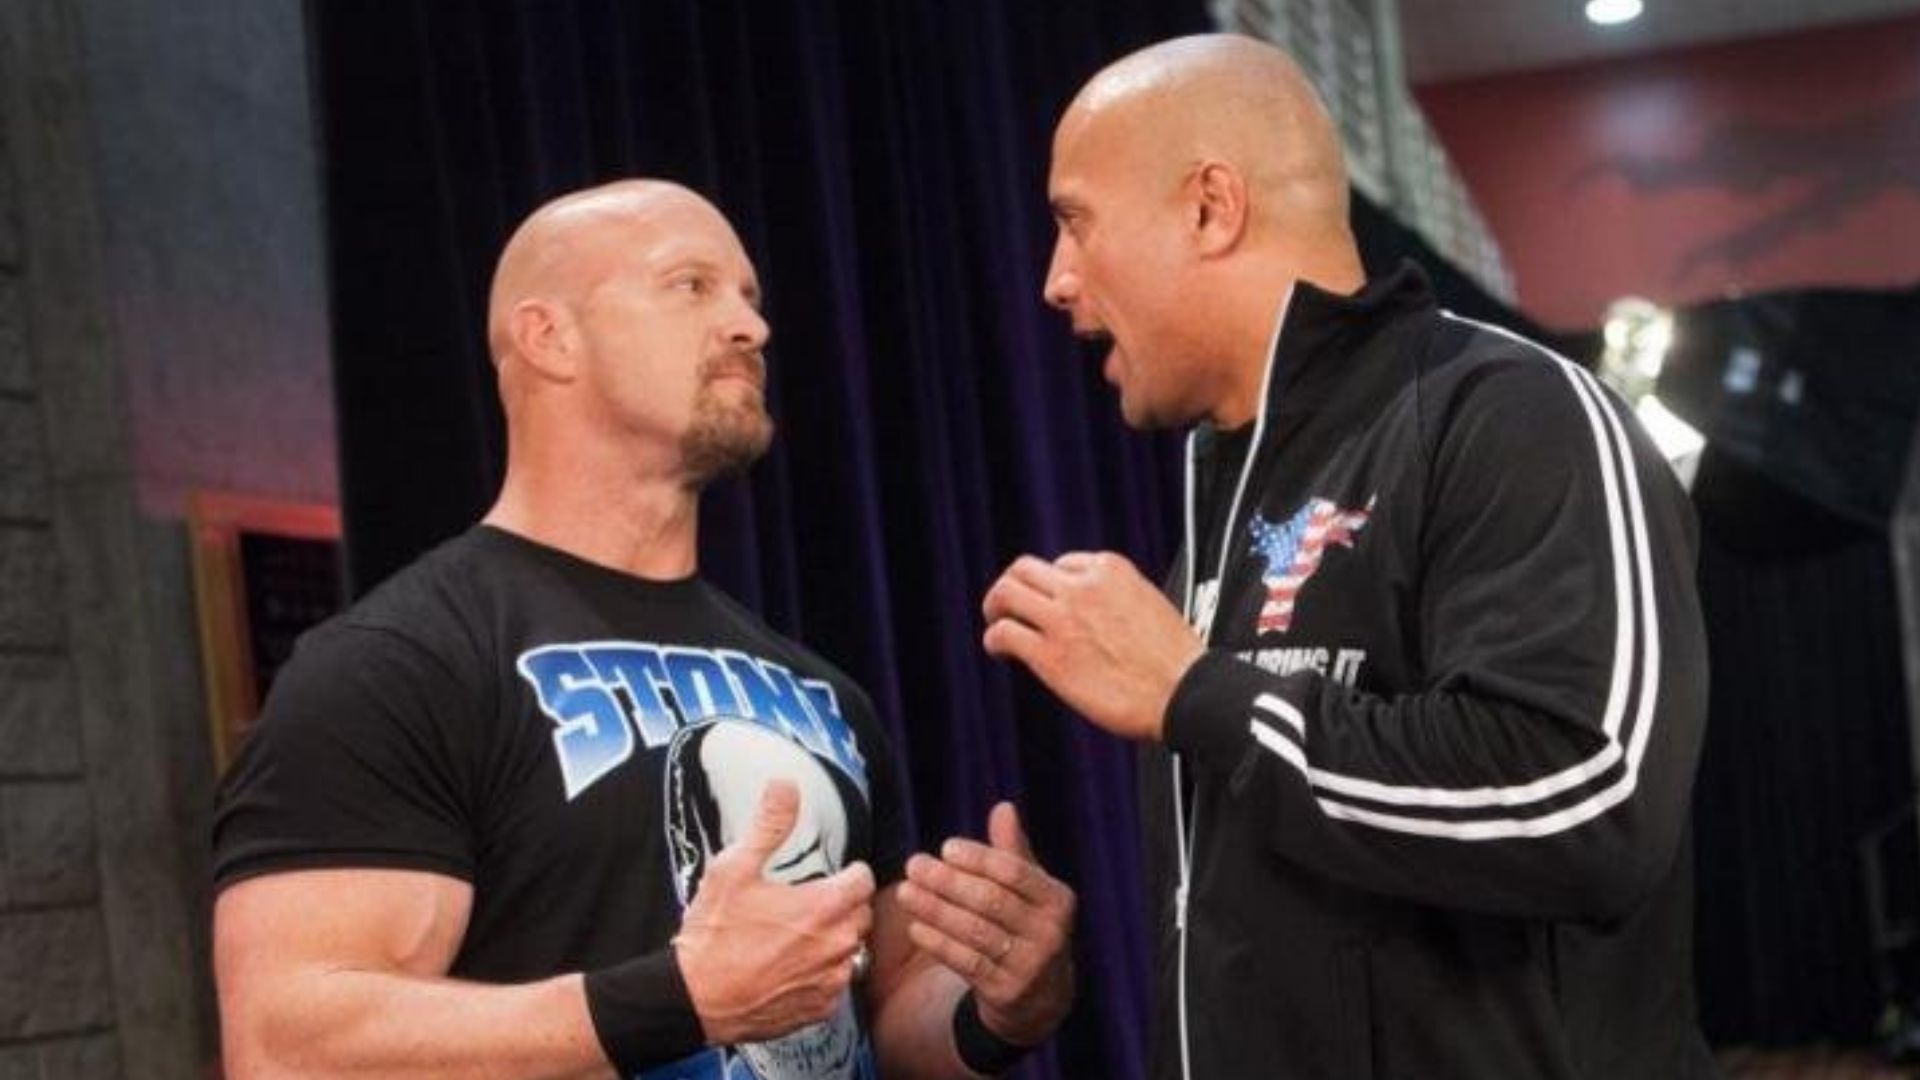 Steve Austin and The Rock faced each other at WrestleMania three times